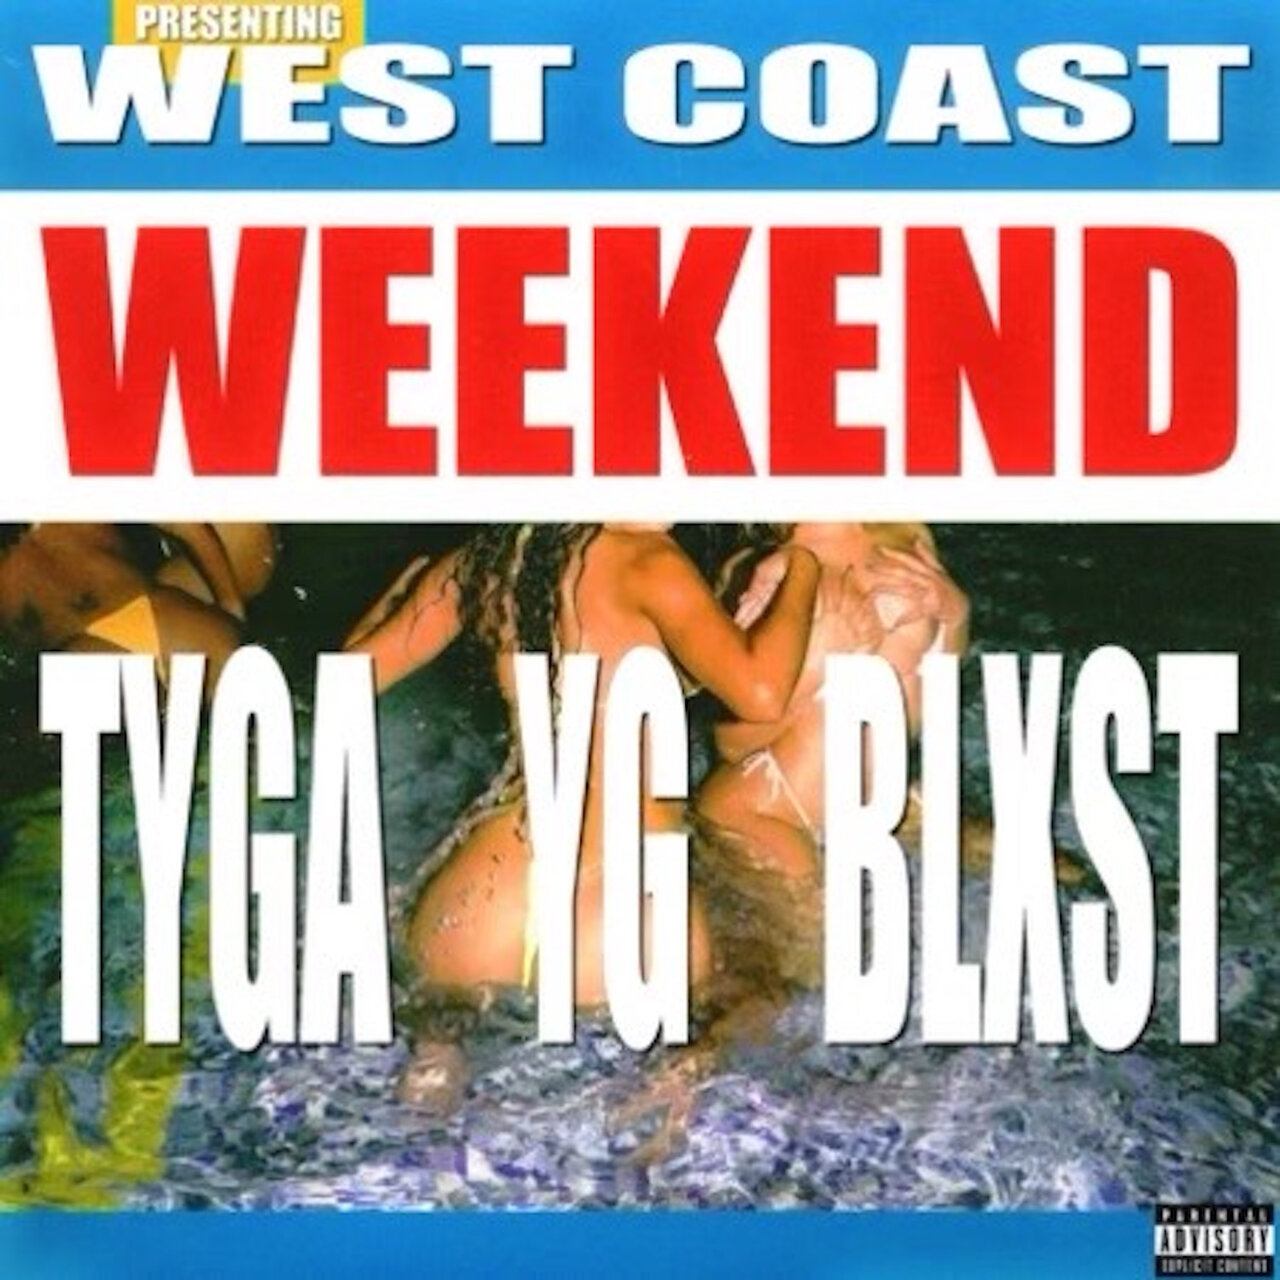 Tyga and YG - West Coast Weekend (ft. Blxst) (Cover)